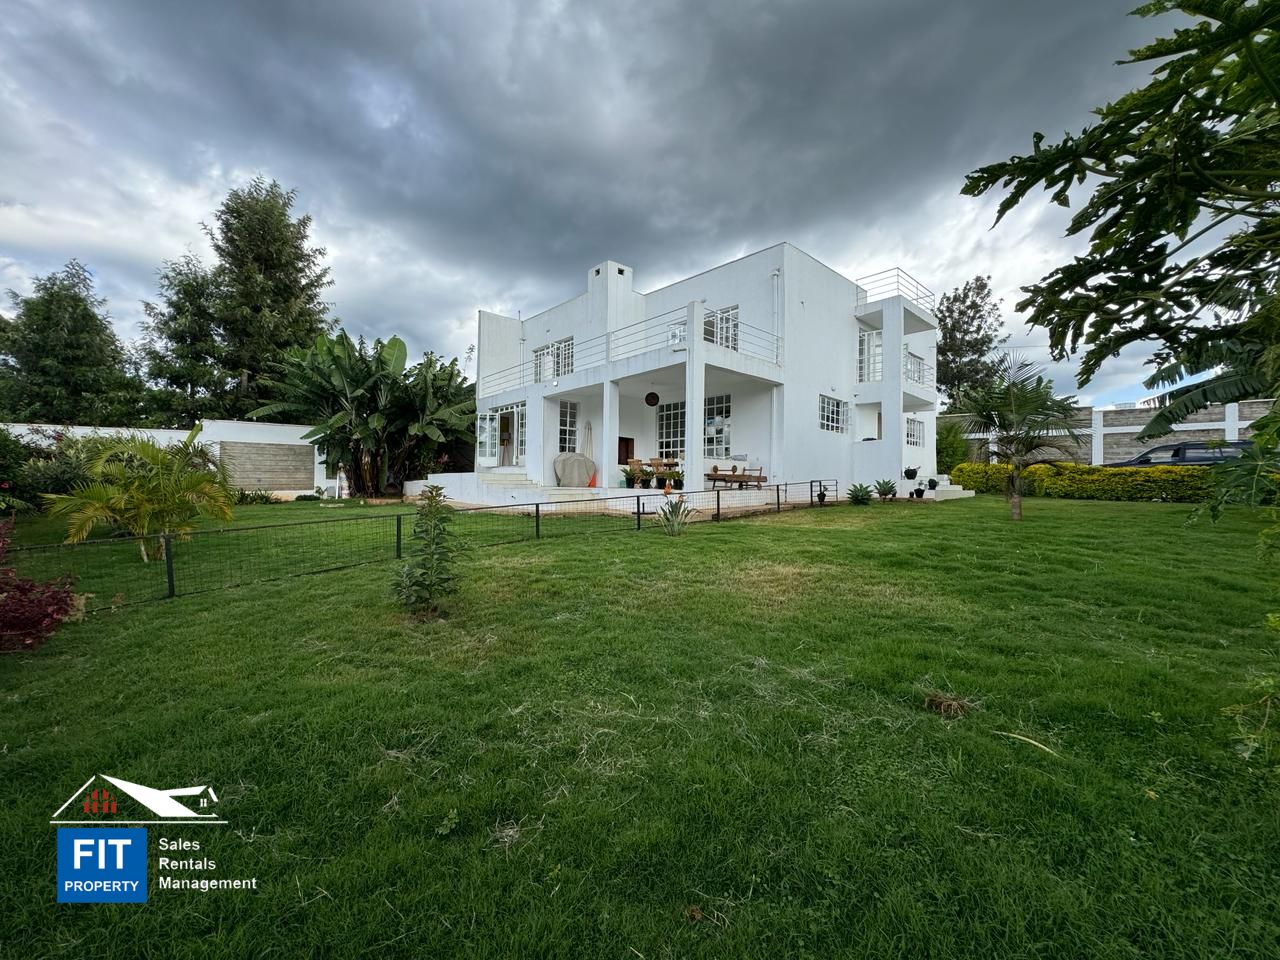 Elegant 4 Bedroom Contemporary Home off Gethathuru Road, Lower Kabete, Nairobi. Crafted by a talented Scandinavian-Kenyan duo. 40M FIT Property